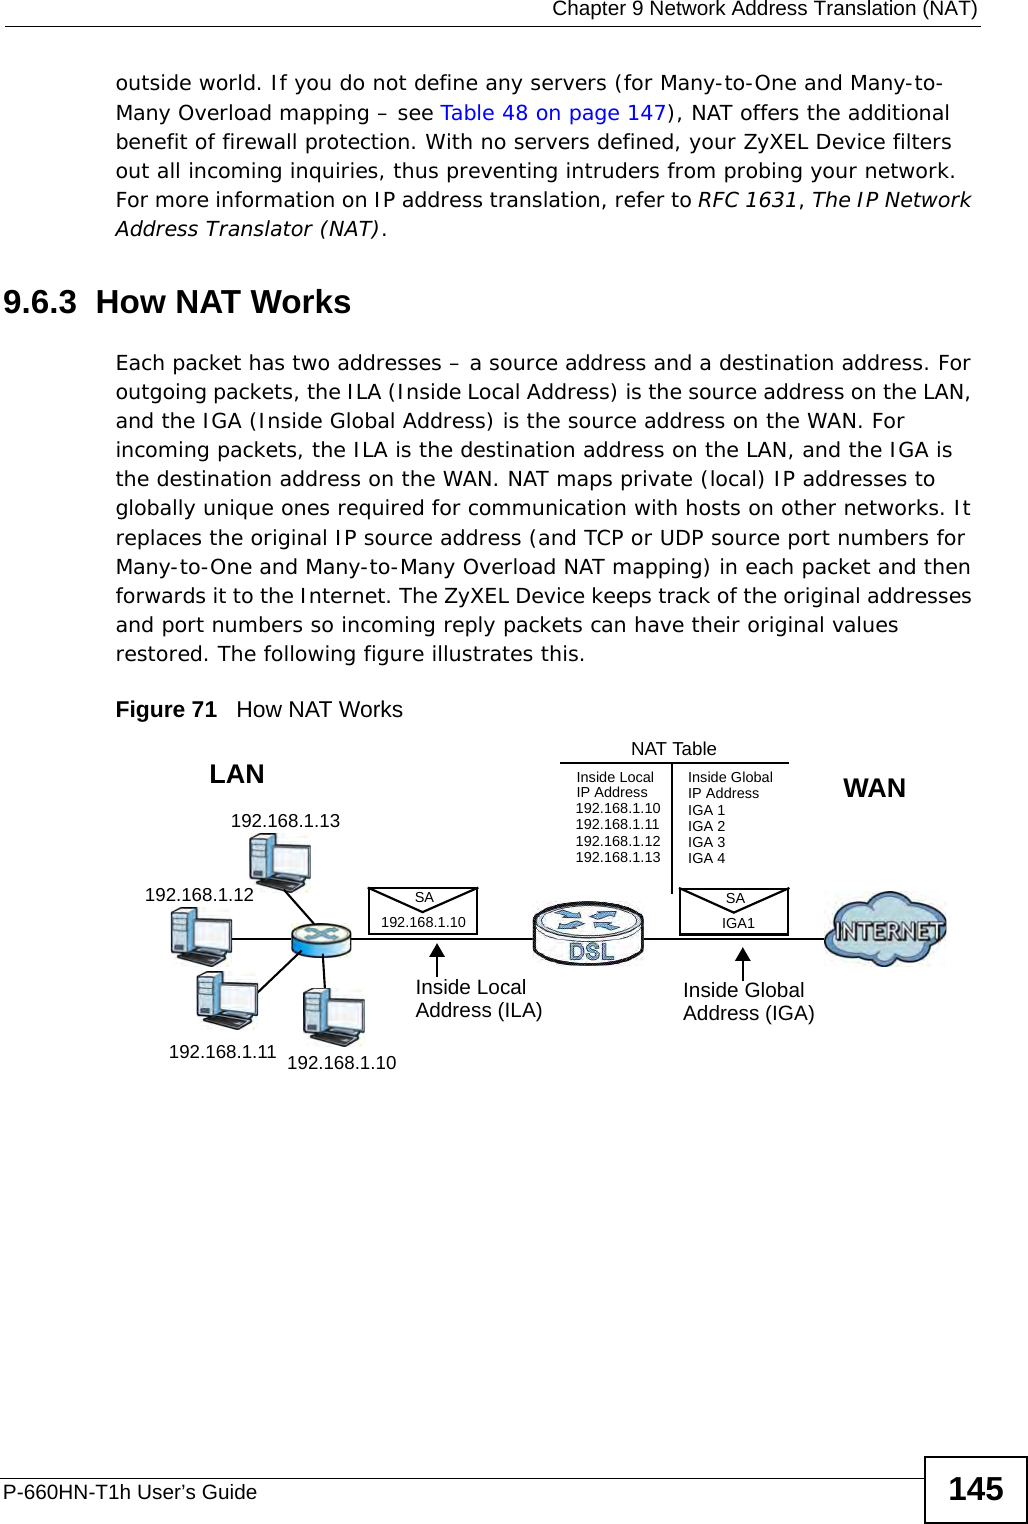  Chapter 9 Network Address Translation (NAT)P-660HN-T1h User’s Guide 145outside world. If you do not define any servers (for Many-to-One and Many-to-Many Overload mapping – see Table 48 on page 147), NAT offers the additional benefit of firewall protection. With no servers defined, your ZyXEL Device filters out all incoming inquiries, thus preventing intruders from probing your network. For more information on IP address translation, refer to RFC 1631, The IP Network Address Translator (NAT).9.6.3  How NAT WorksEach packet has two addresses – a source address and a destination address. For outgoing packets, the ILA (Inside Local Address) is the source address on the LAN, and the IGA (Inside Global Address) is the source address on the WAN. For incoming packets, the ILA is the destination address on the LAN, and the IGA is the destination address on the WAN. NAT maps private (local) IP addresses to globally unique ones required for communication with hosts on other networks. It replaces the original IP source address (and TCP or UDP source port numbers for Many-to-One and Many-to-Many Overload NAT mapping) in each packet and then forwards it to the Internet. The ZyXEL Device keeps track of the original addresses and port numbers so incoming reply packets can have their original values restored. The following figure illustrates this.Figure 71   How NAT Works192.168.1.13192.168.1.10192.168.1.11192.168.1.12 SA192.168.1.10SAIGA1Inside LocalIP Address192.168.1.10192.168.1.11192.168.1.12192.168.1.13Inside Global IP AddressIGA 1IGA 2IGA 3IGA 4NAT TableWANLANInside LocalAddress (ILA) Inside GlobalAddress (IGA)